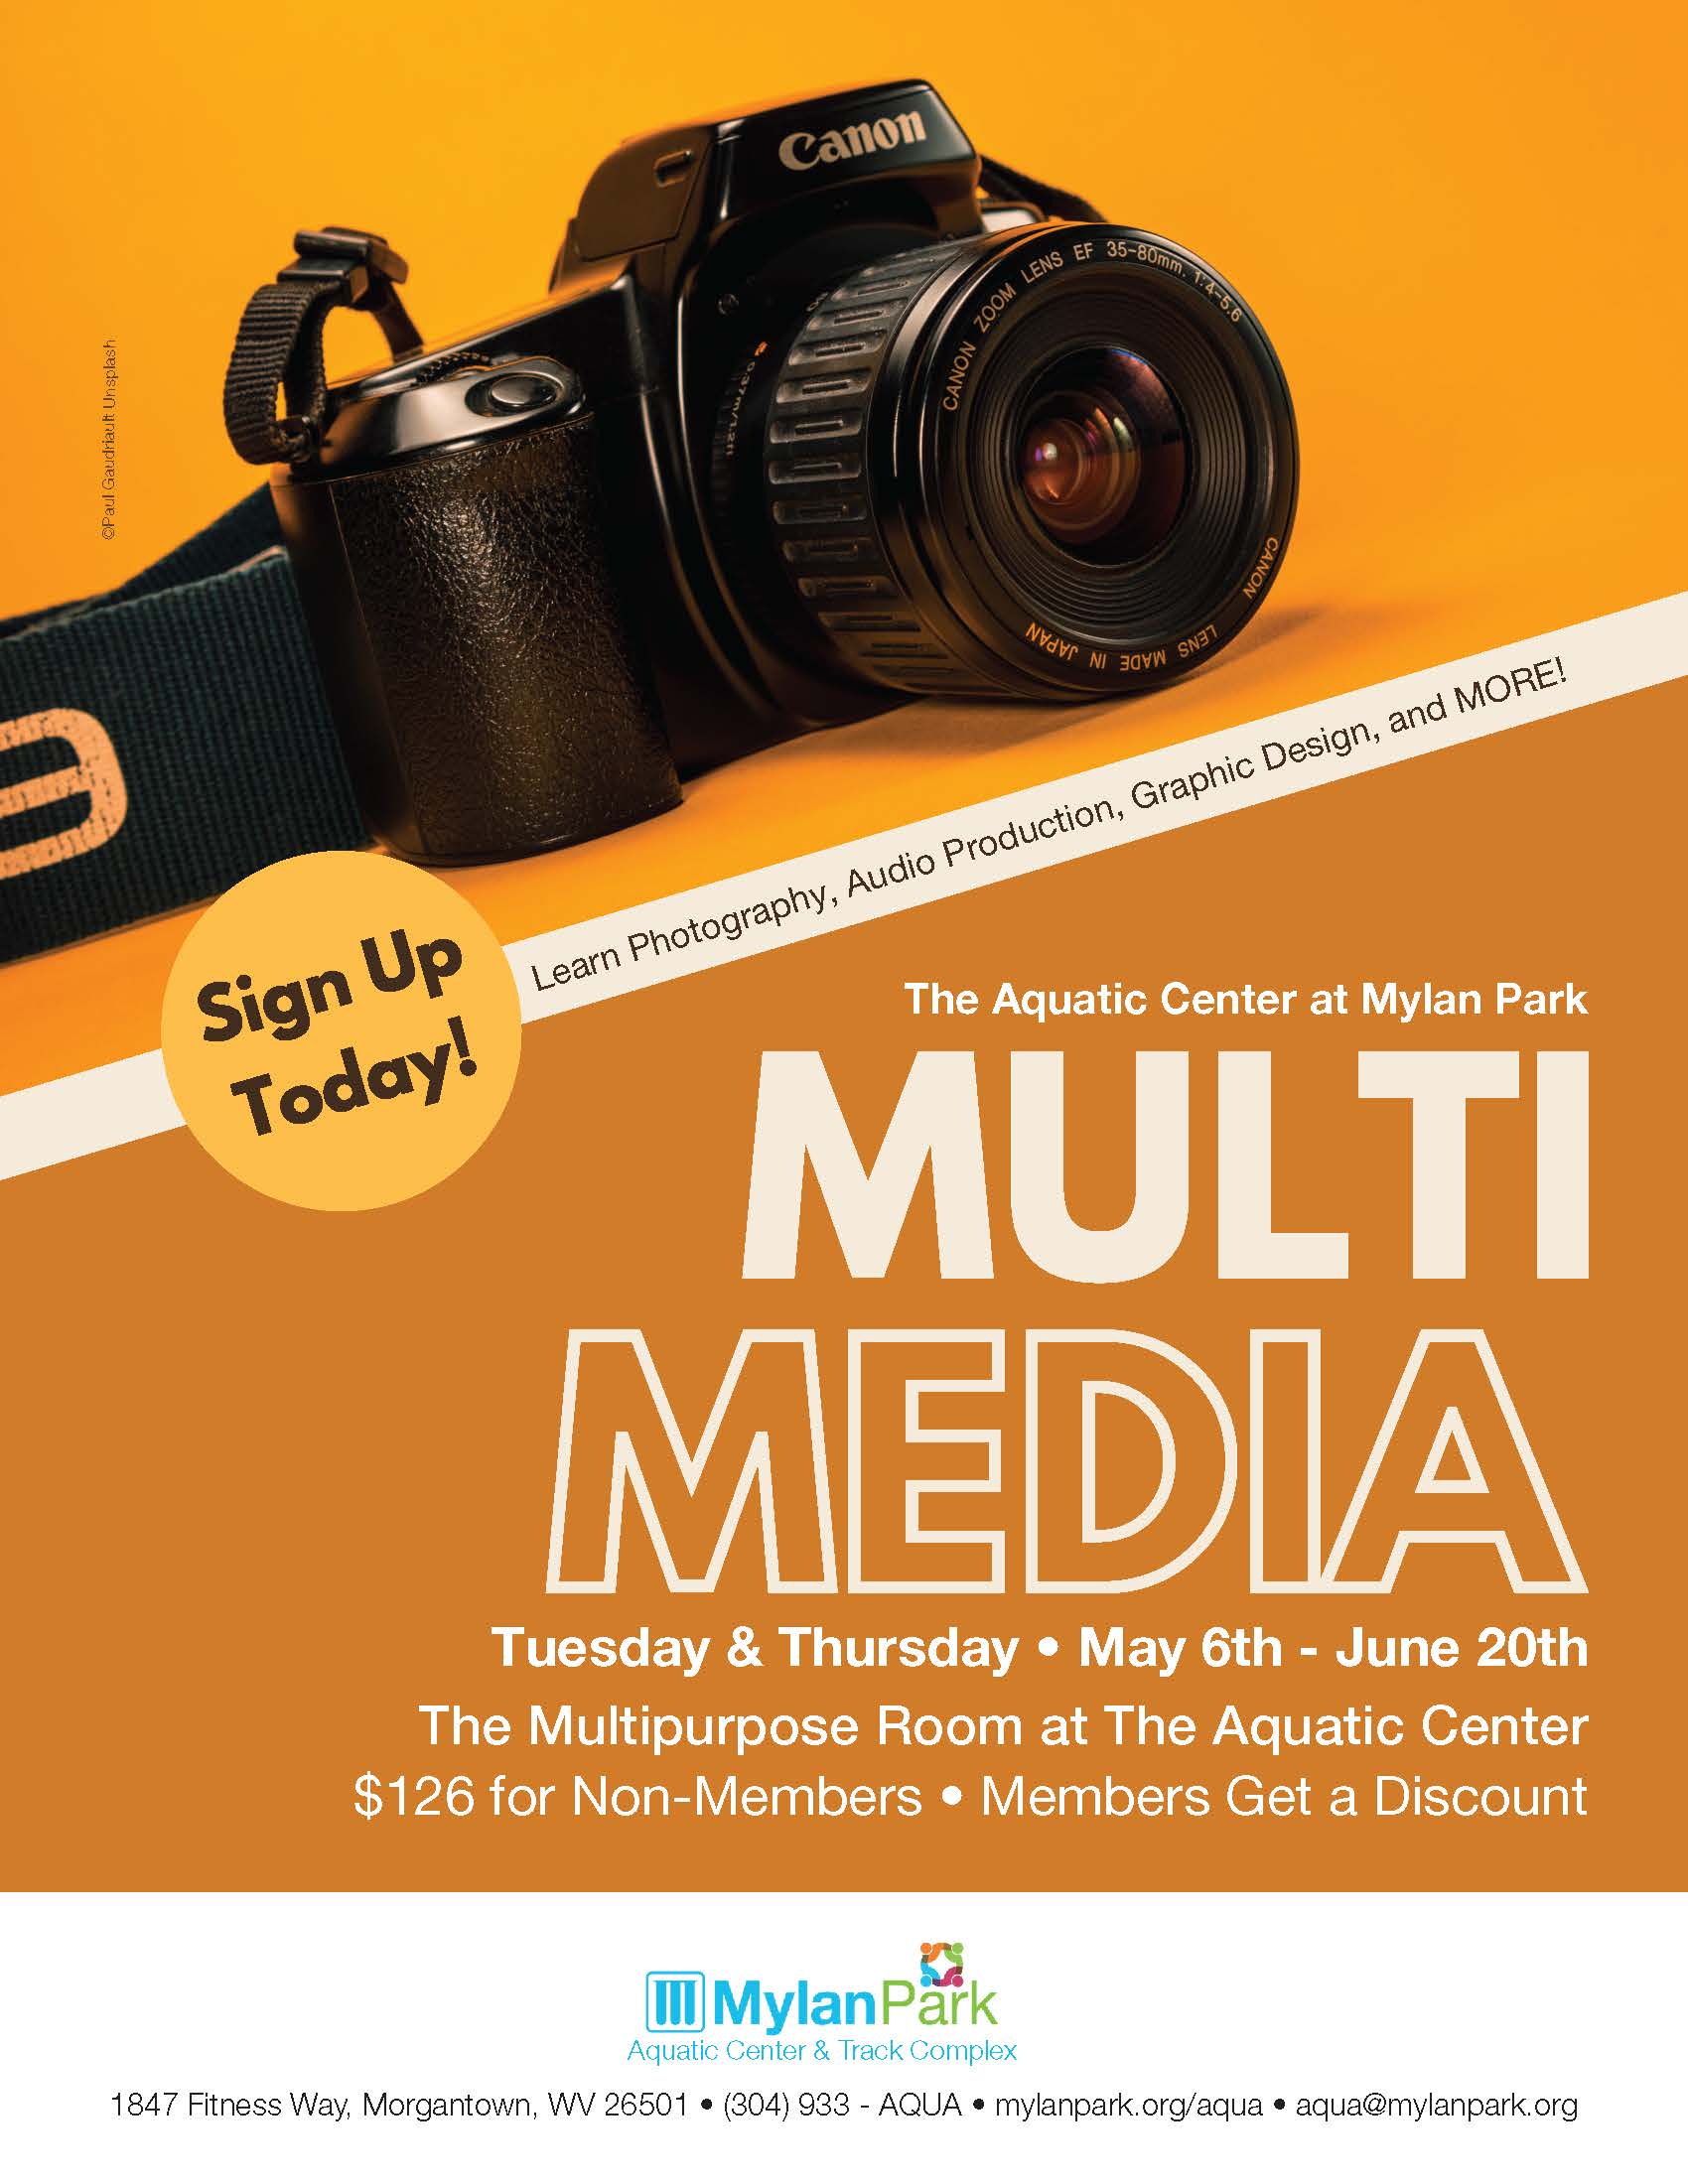 MULTI MEDIA CLASSES at the Aquatic Center at Mylan Park May 6th - June 20th every Tuesday & Thursday Evenings in the multi-purpose room! LIMITED SPOTS AVAILABLE. Register today!